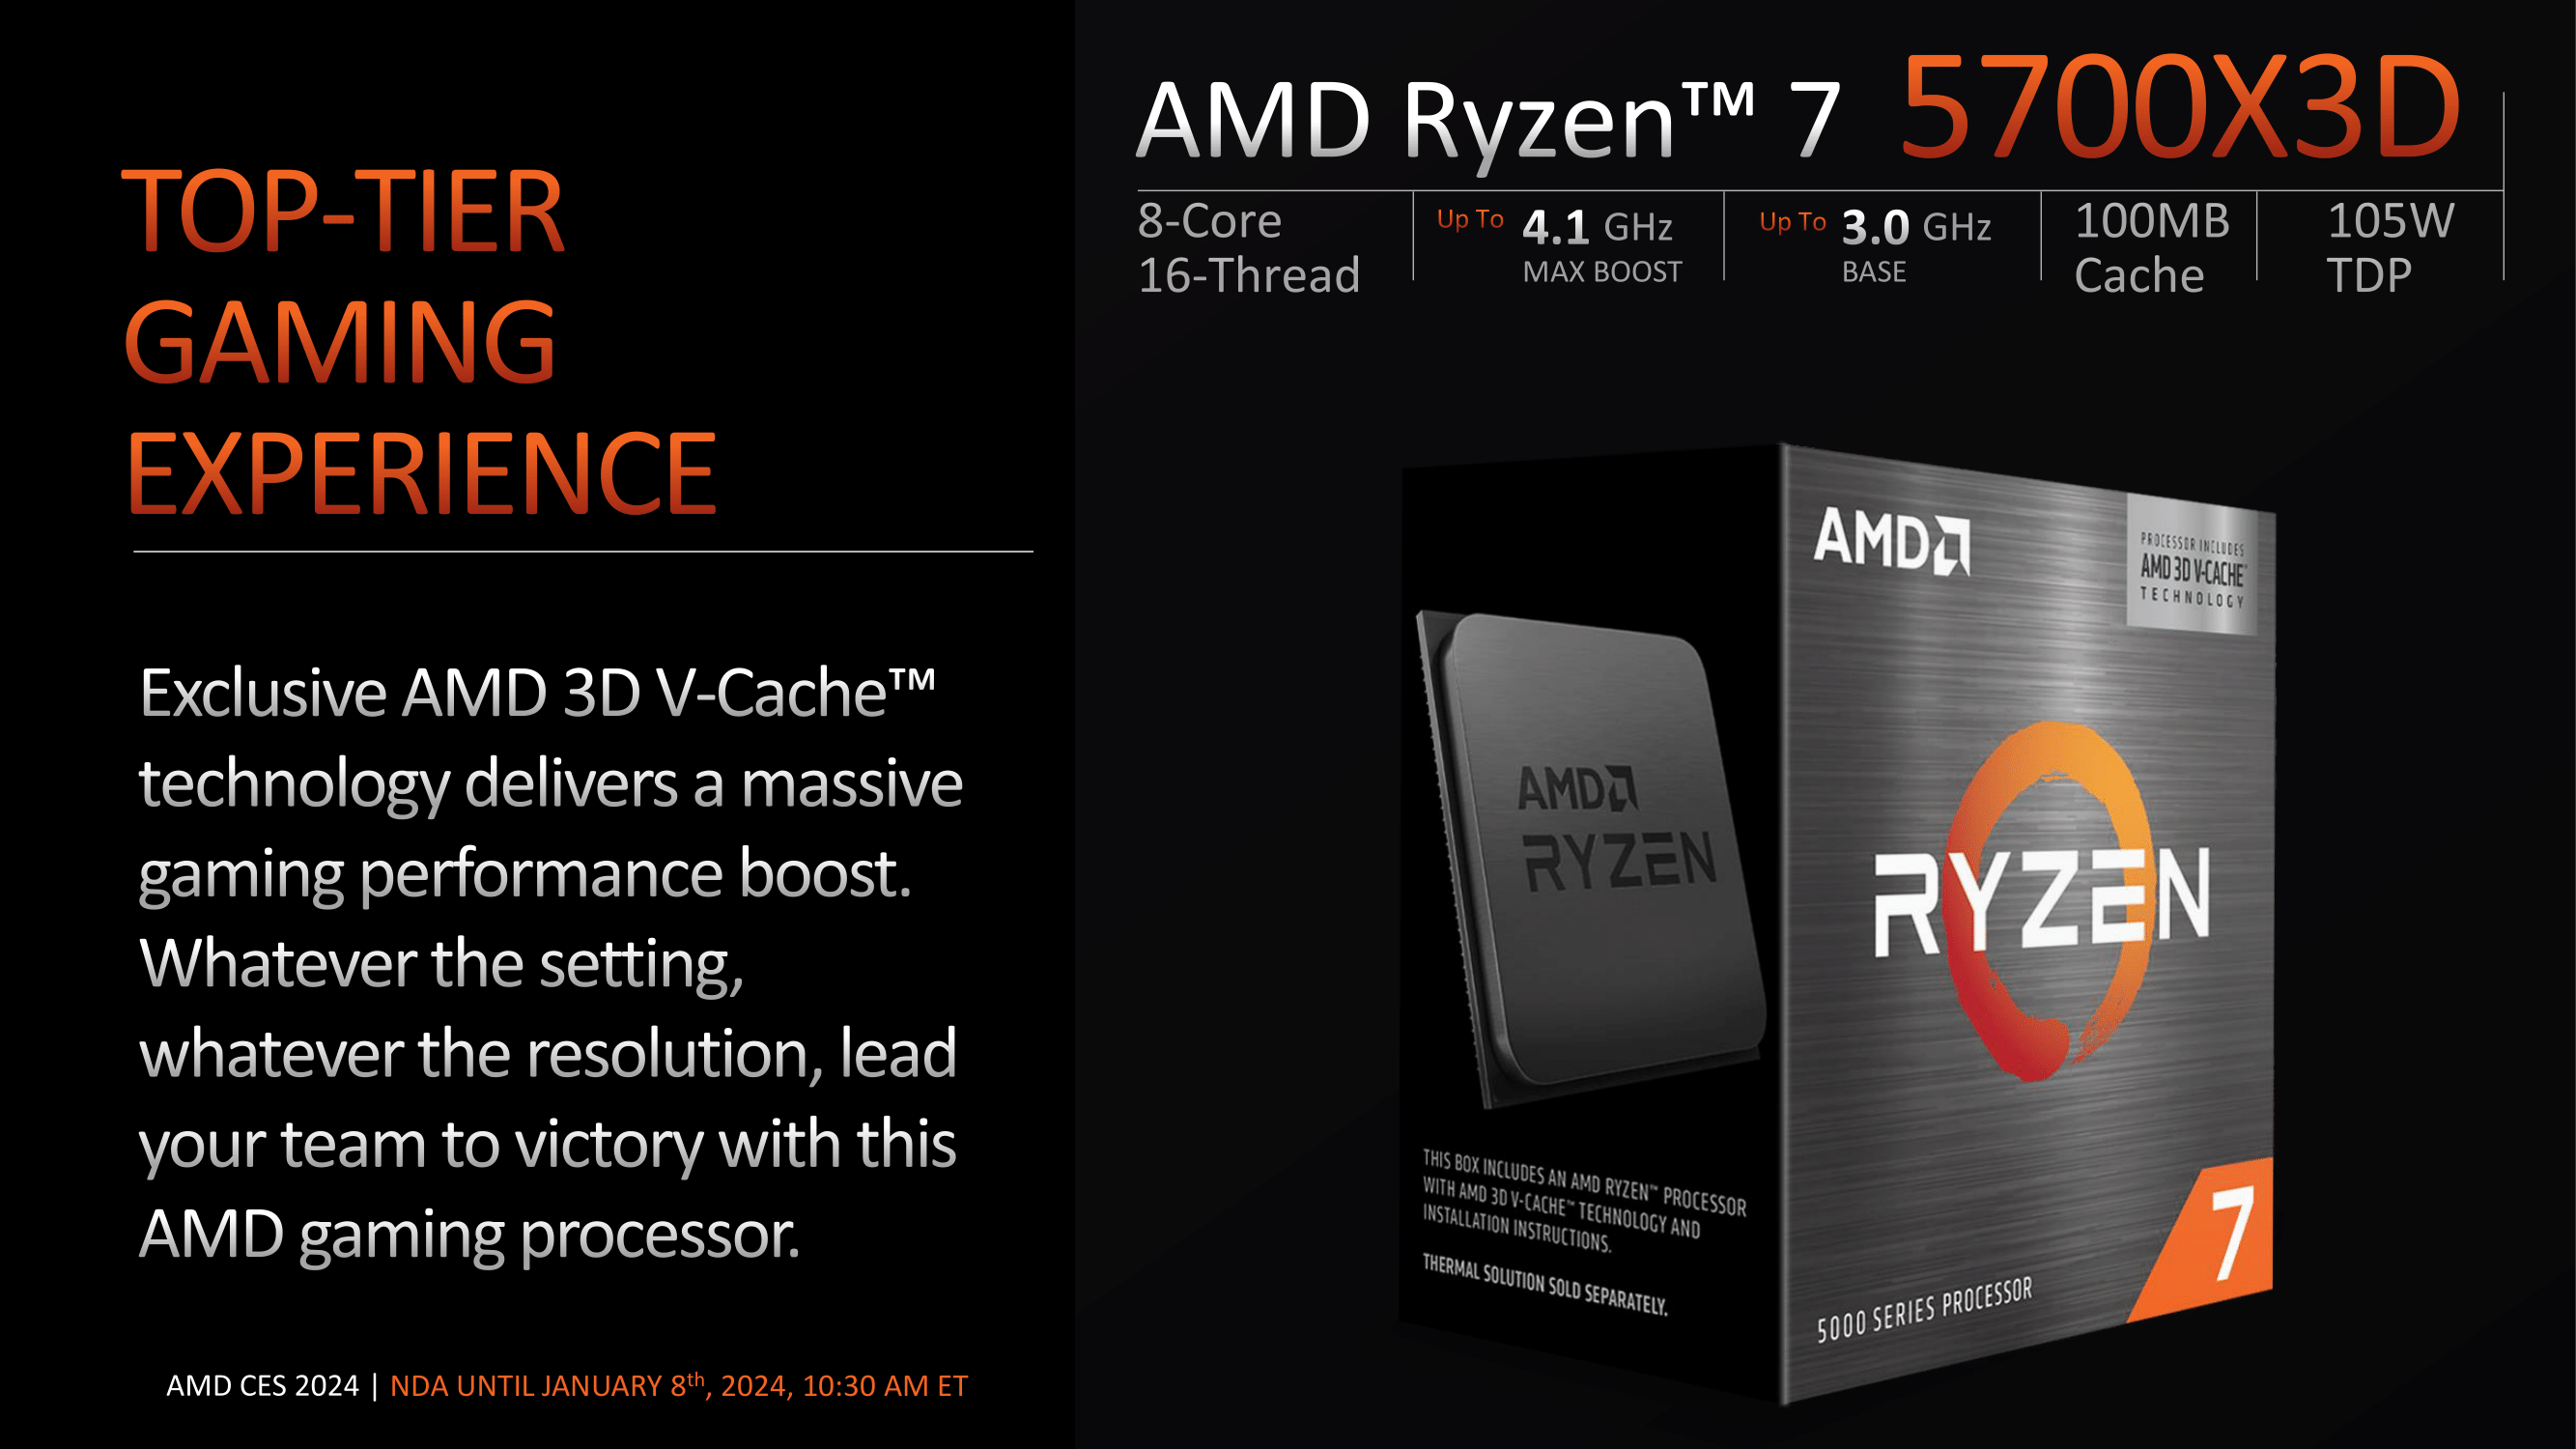 AMD Ryzen 7 5800X3D Continues Showing Much Potential For 3D V